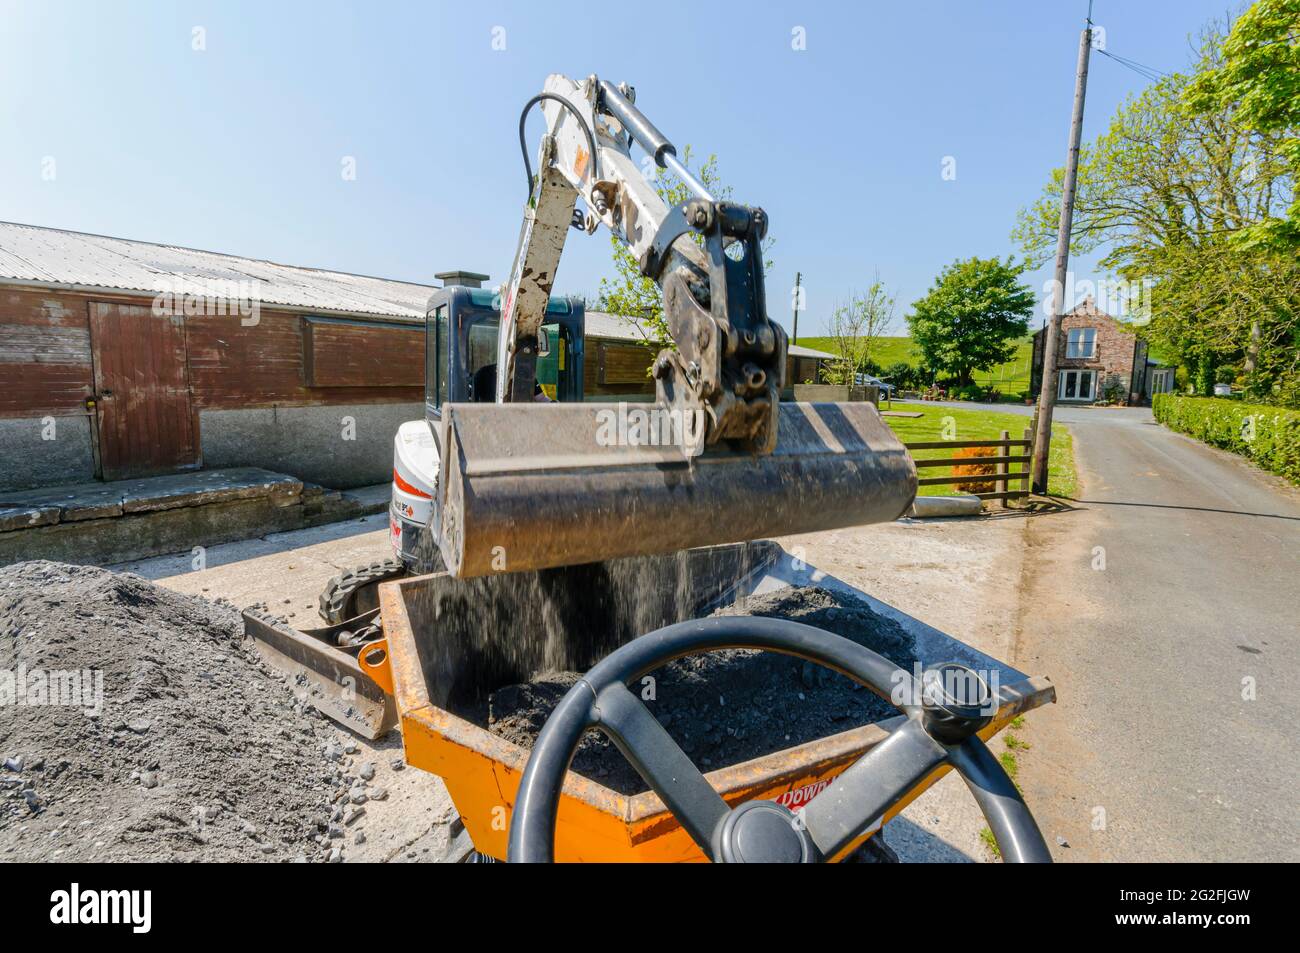 Bobcat E25 mini-digger excavator loads crushed blinding aggregate stones into a yellow dump truck at a building site on a farm. Stock Photo